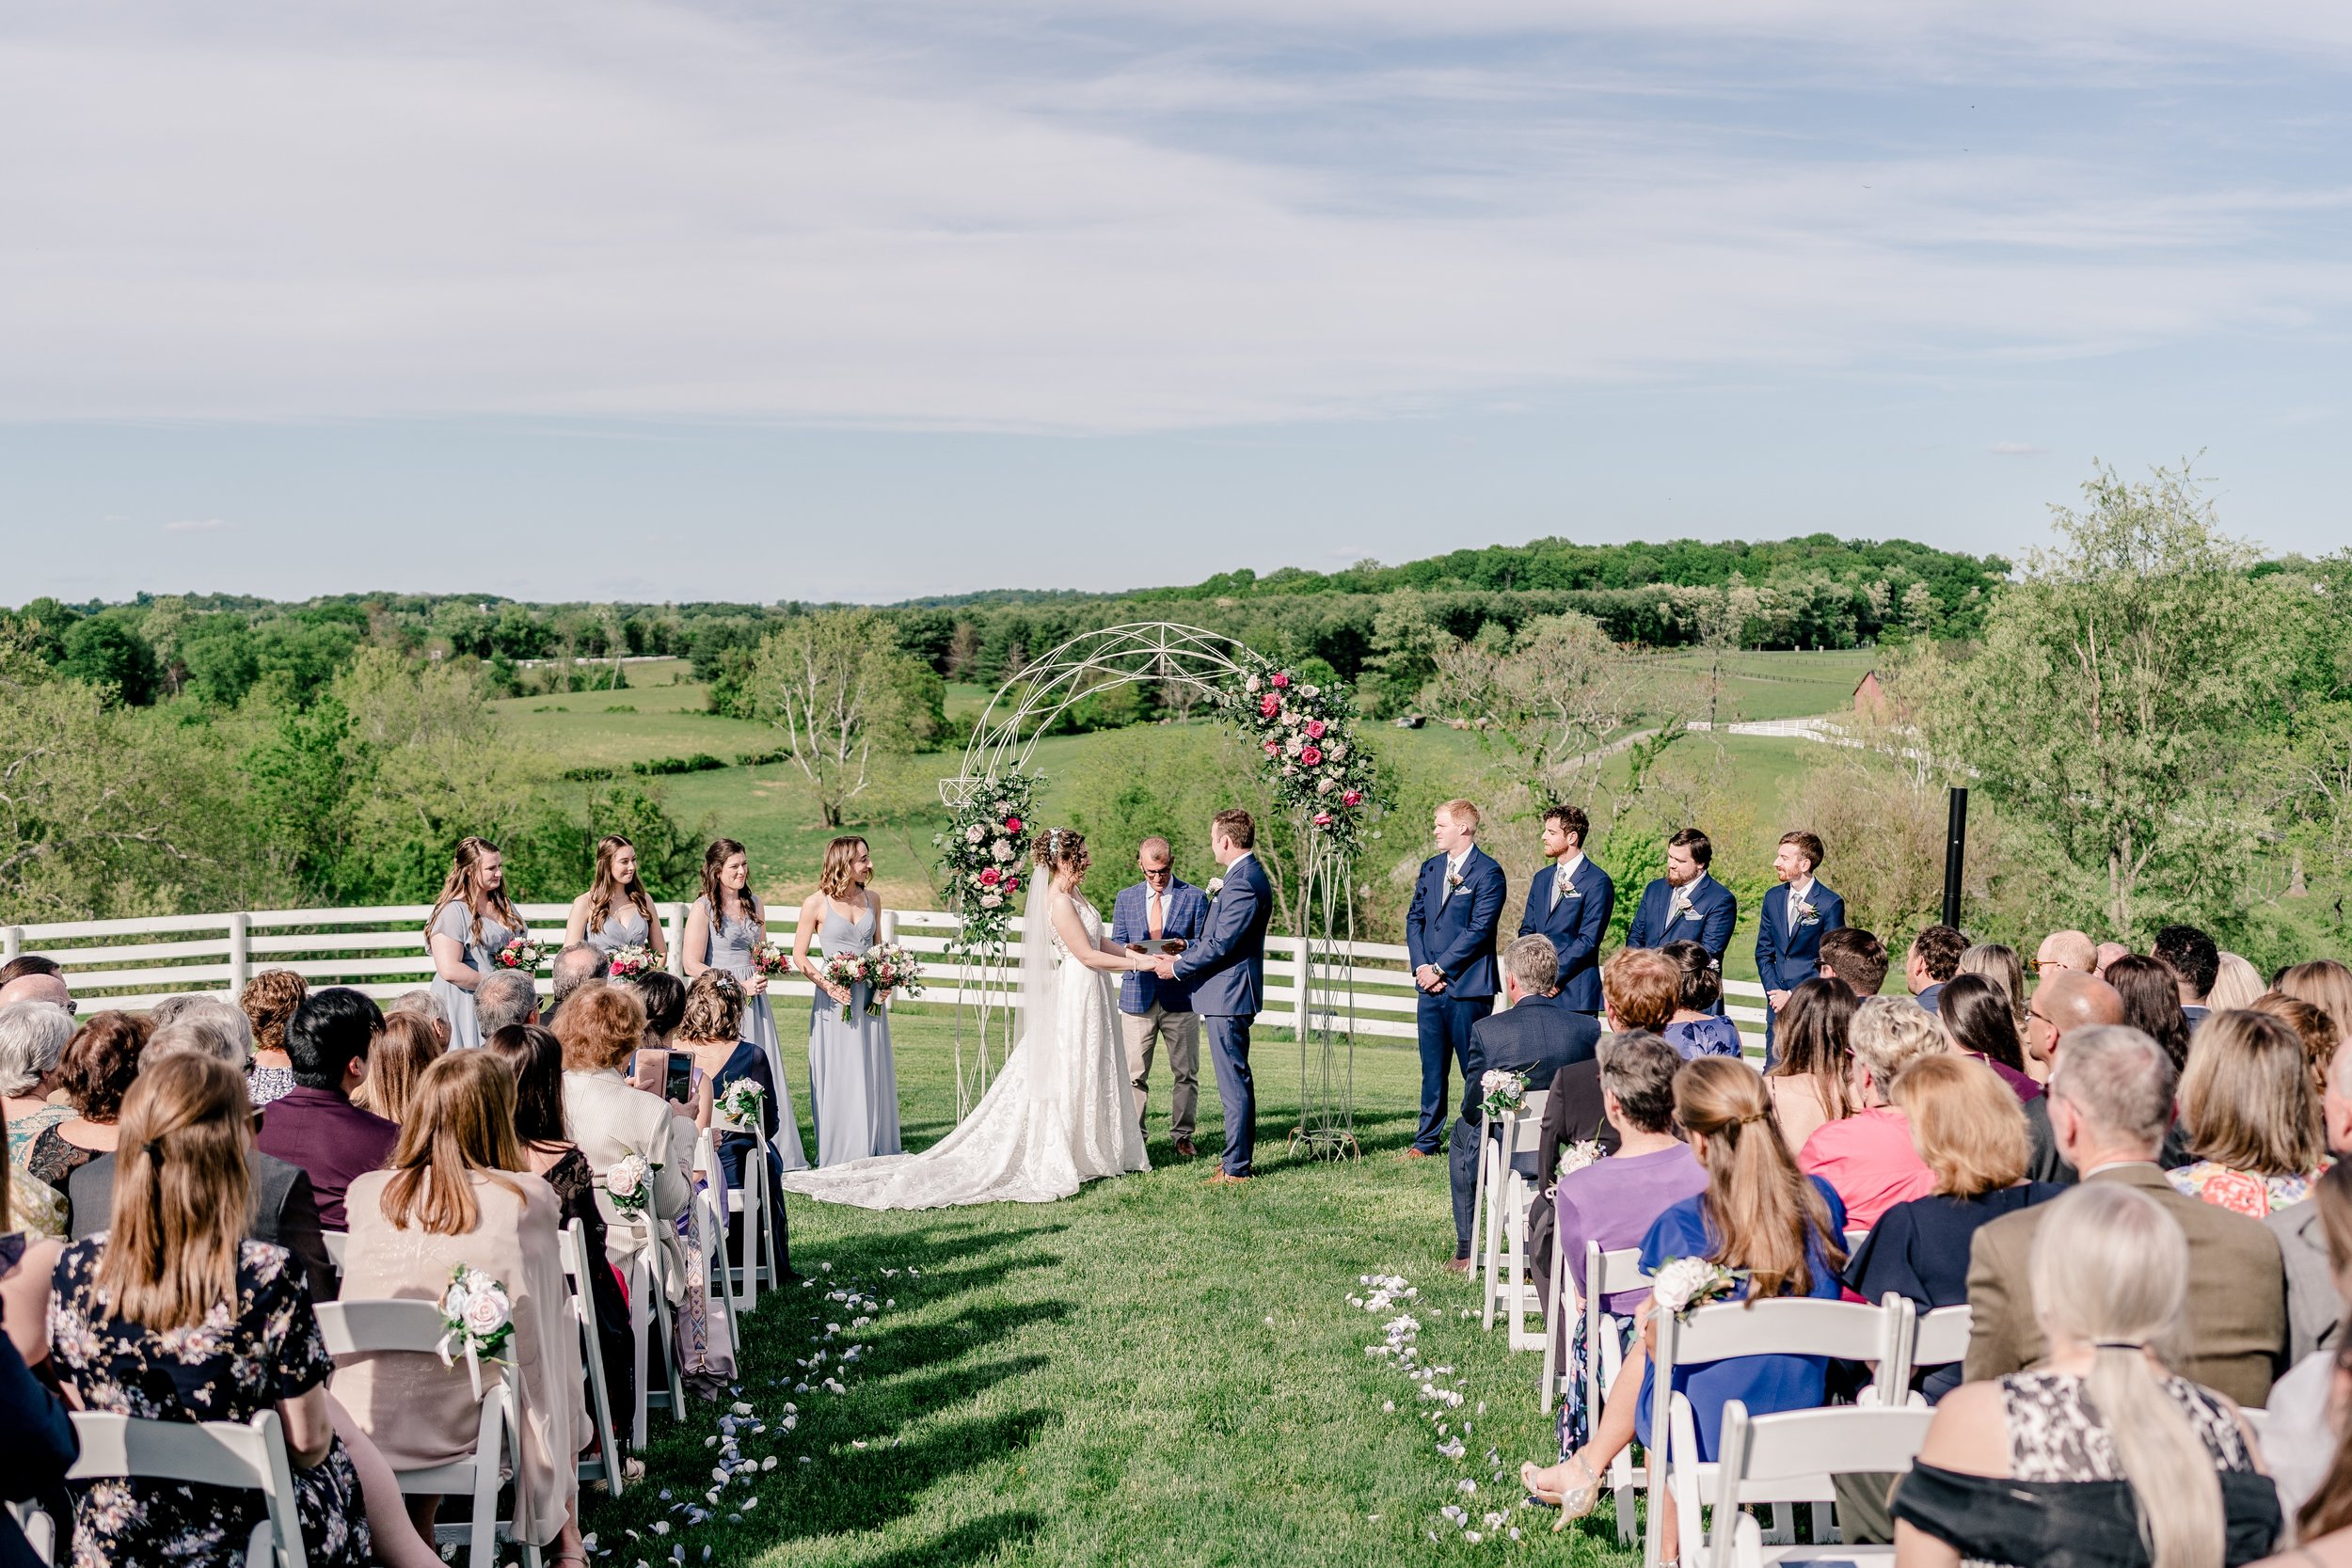 A wide view of the outdoor ceremony space at one of the best wedding venues in Loudoun County Virginia